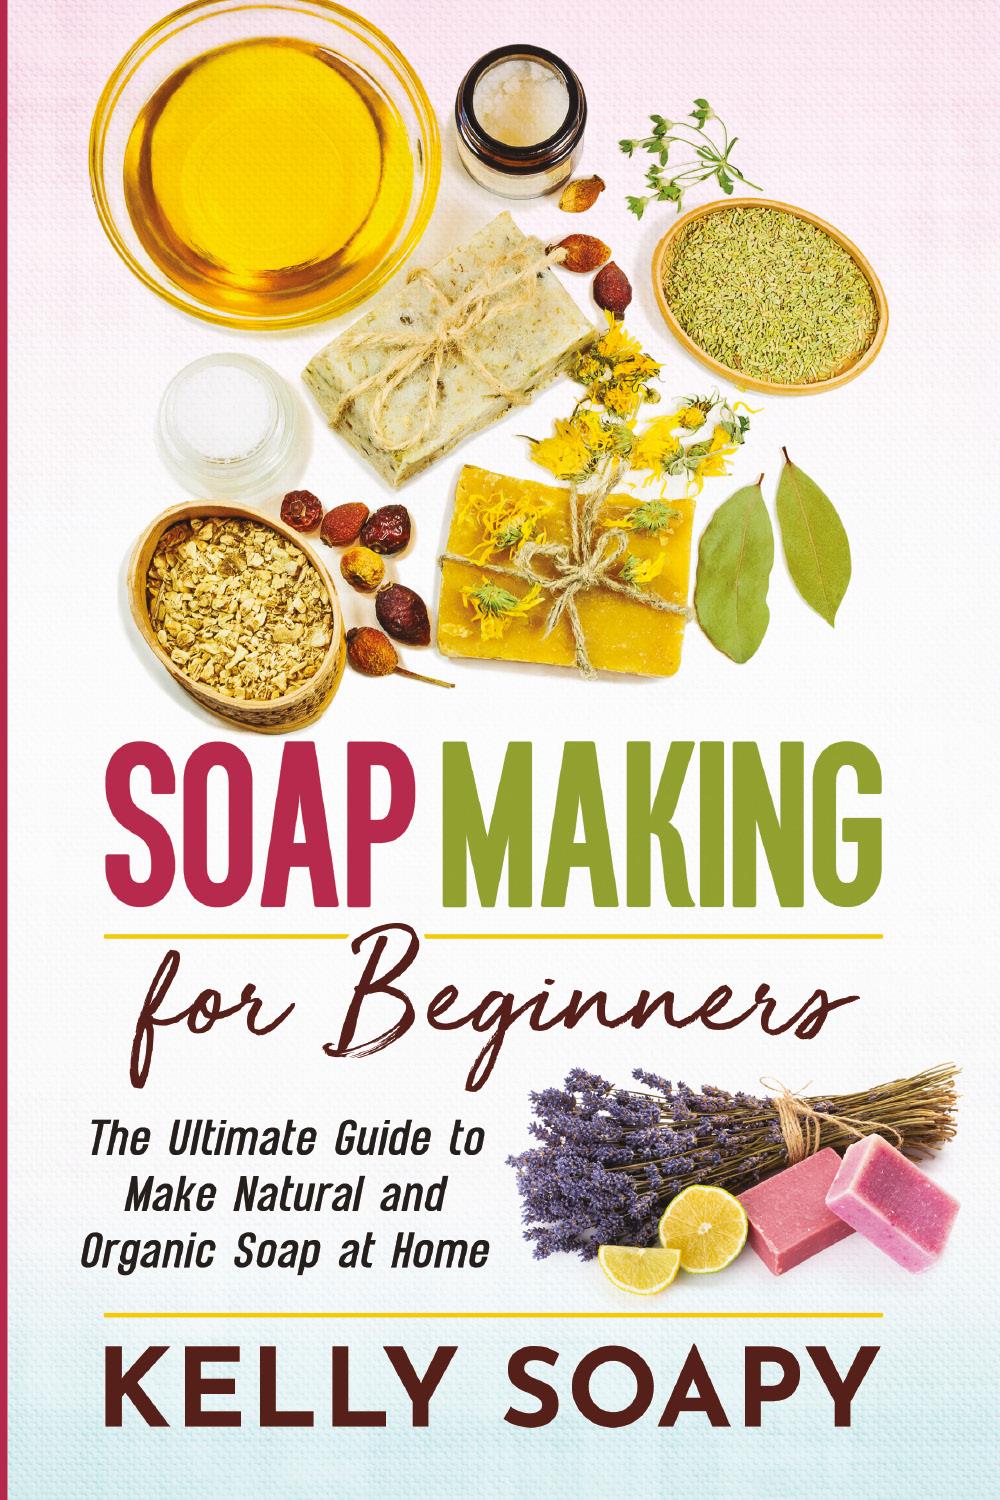 Soap Making for Beginners. The Ultimate Guide to Make Natural and Organic Soap at Home